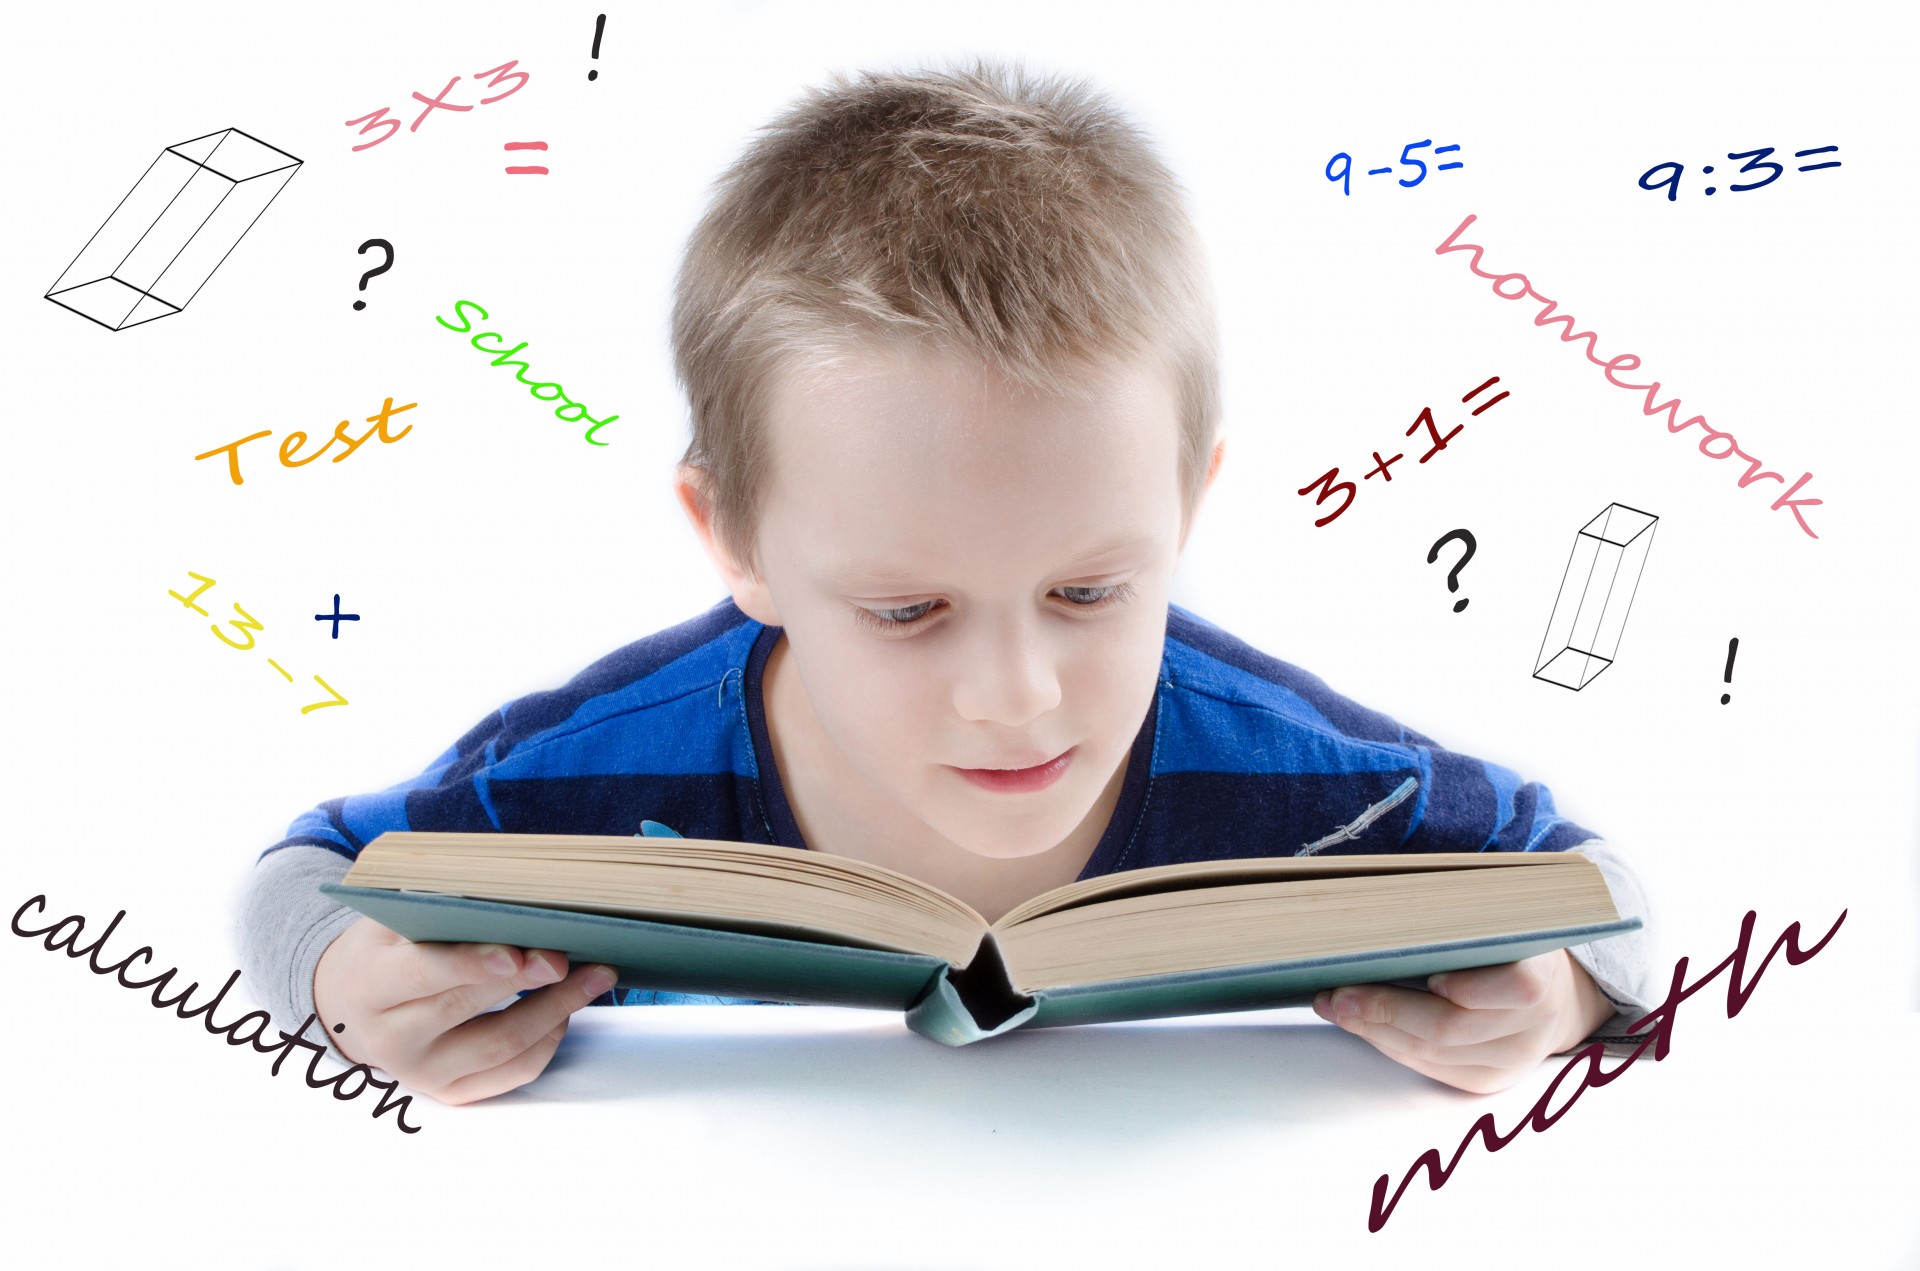 Child reading a book, surrounded by mathematical scribbles